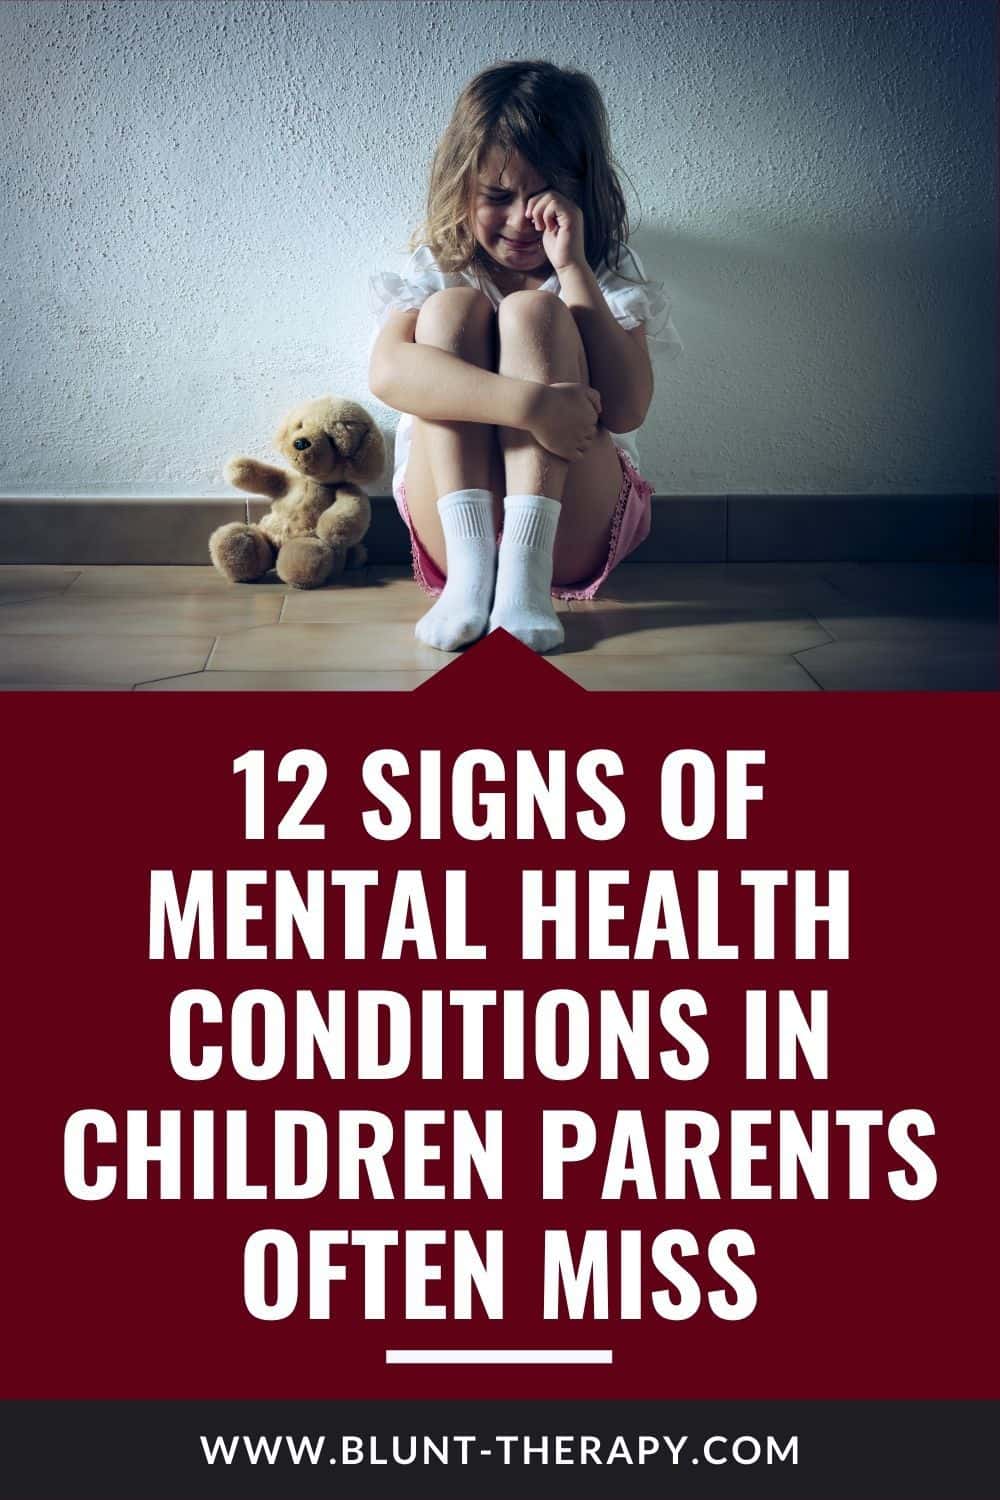 Early Warning signs for children with Mental Illness